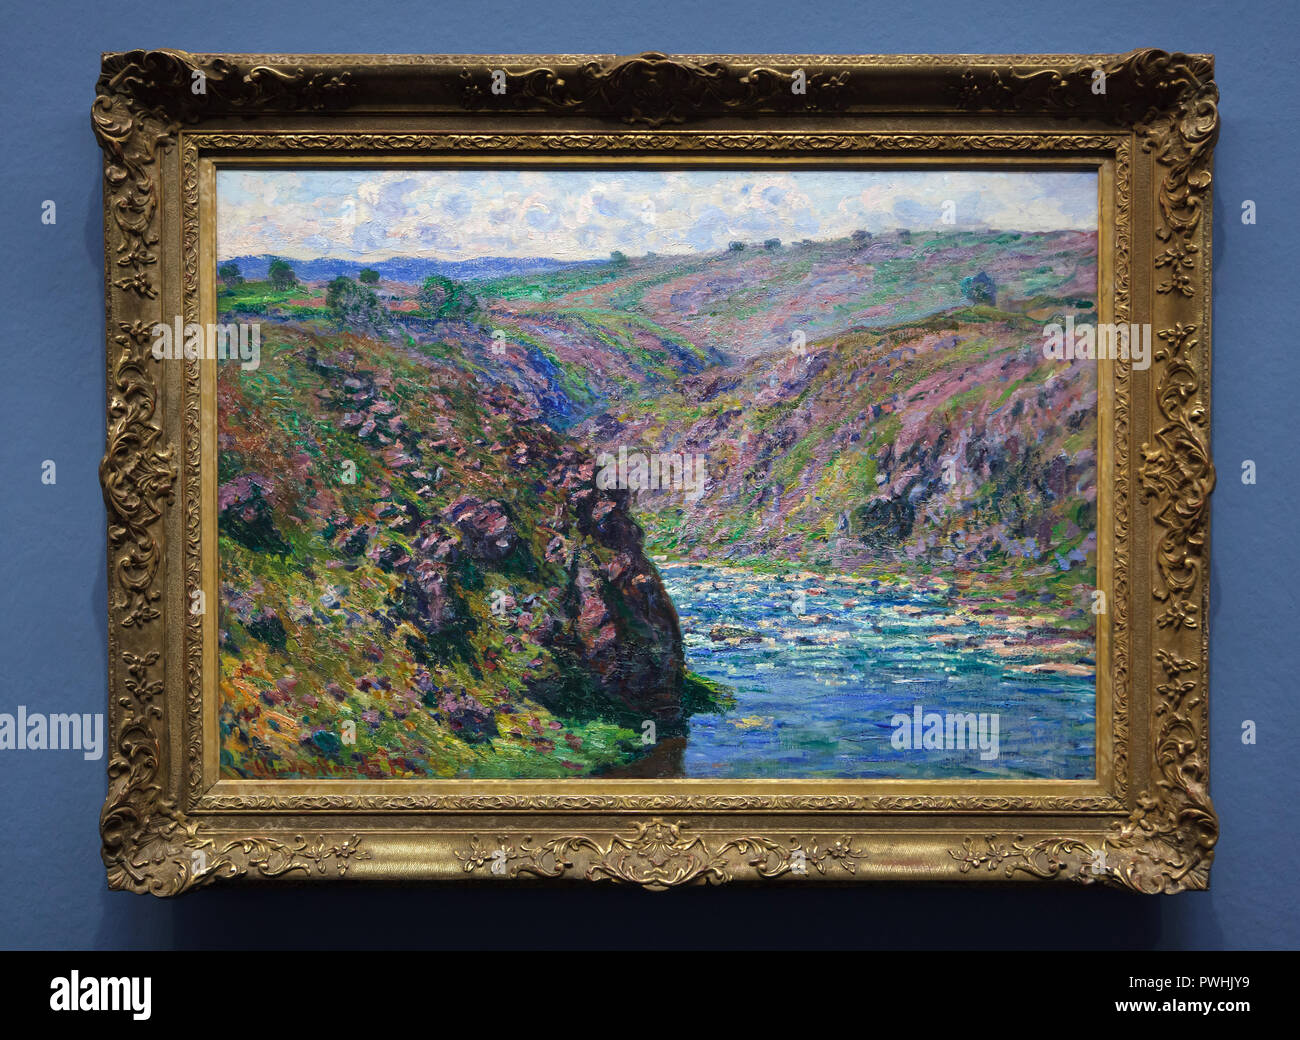 Painting 'Valley of the Creuse, Sunlight Effect' (1889) by French Impressionist painter Claude Monet on display at his retrospective exhibition in the Albertina Museum in Vienna, Austria. The exhibition devoted to the founder of French Impressionist painting runs till 6 January 2019. Stock Photo